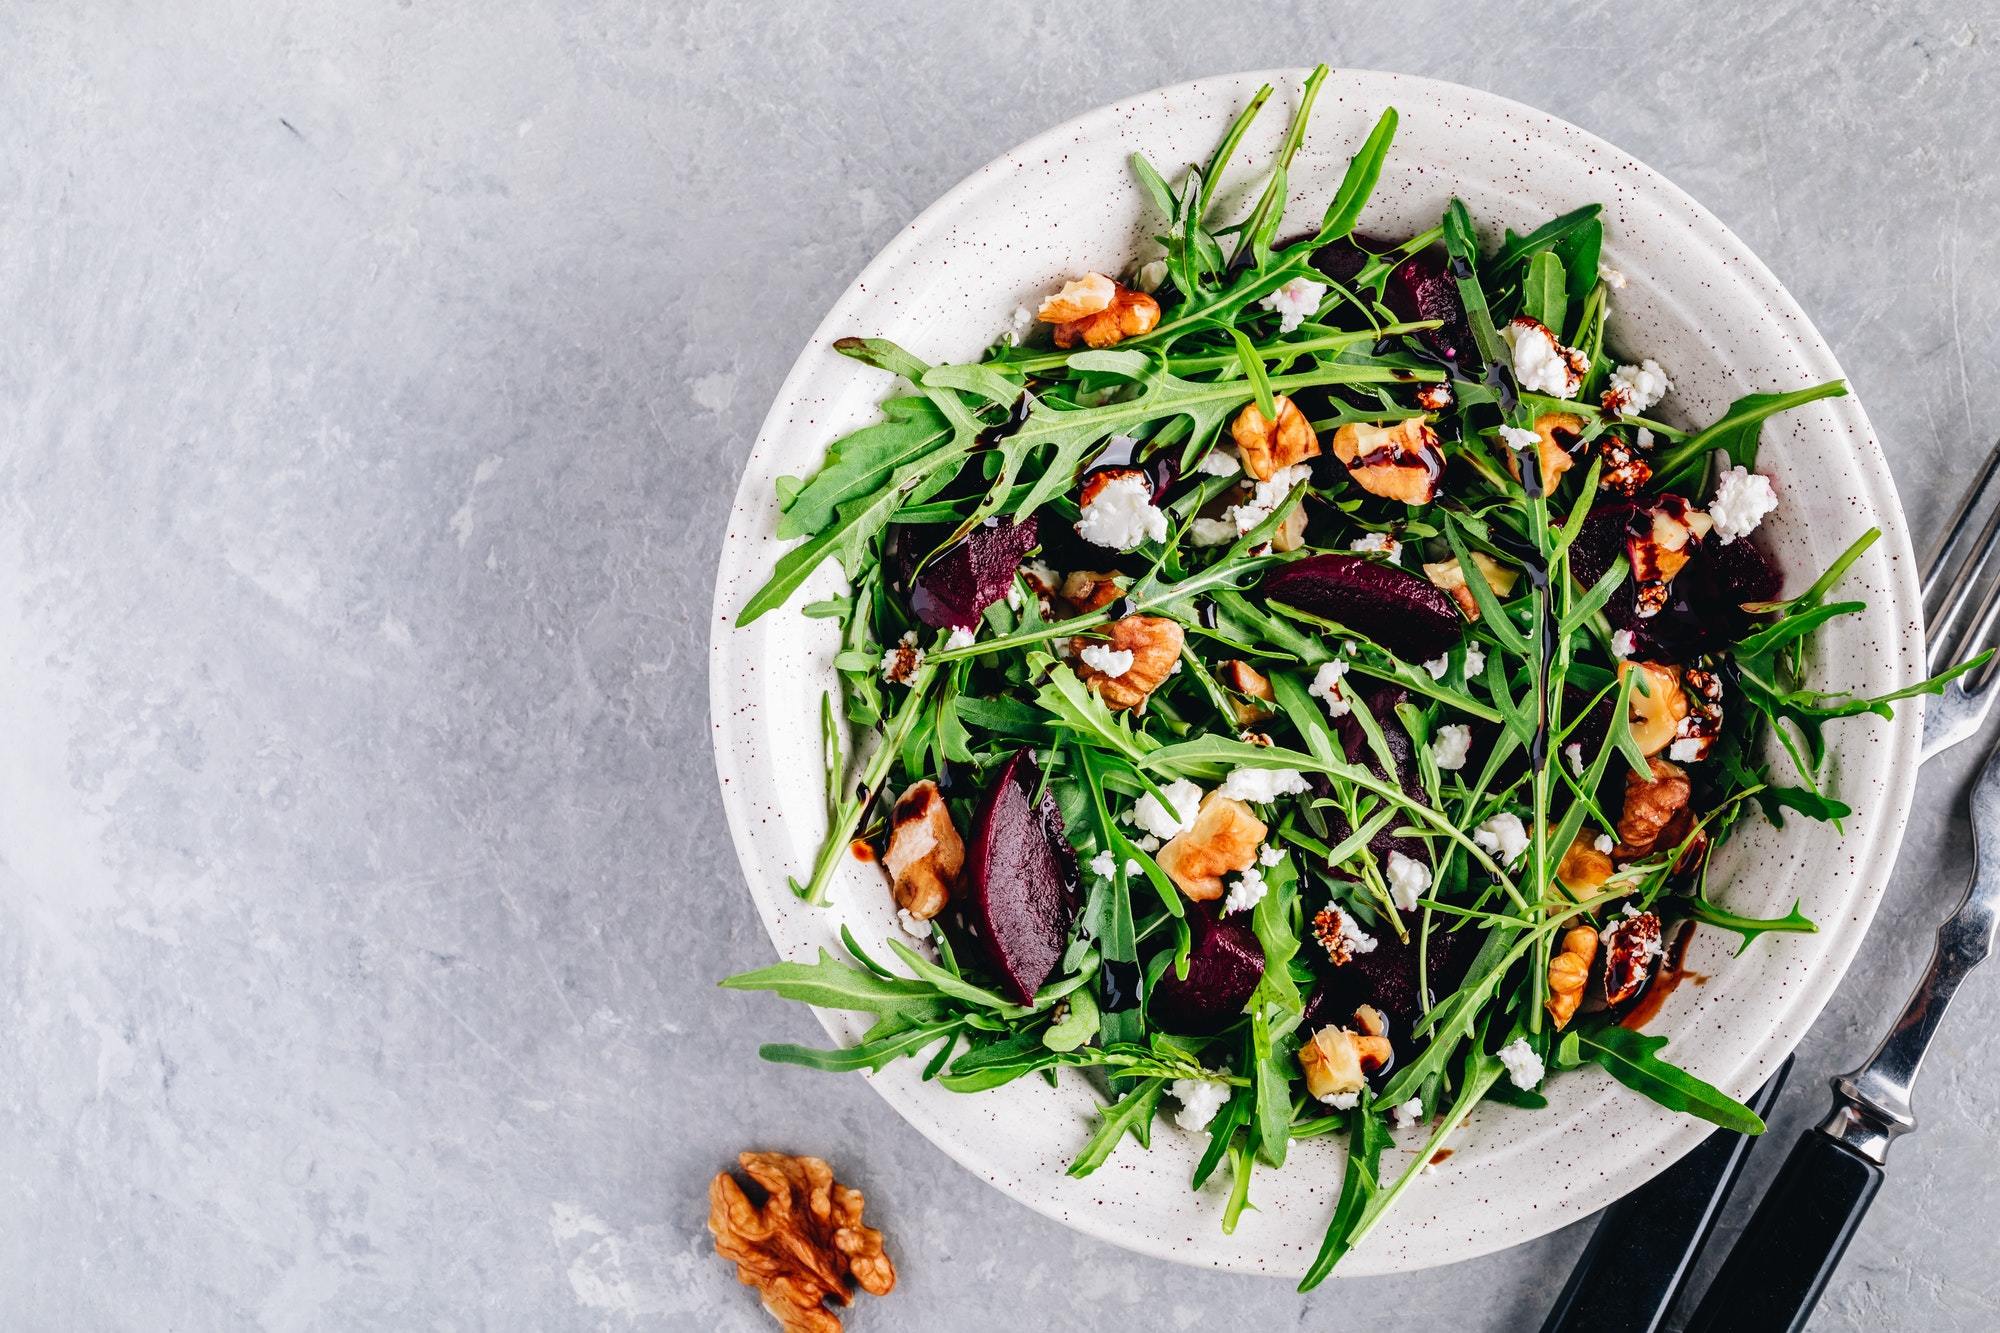 Arugula beet salad with goat or feta cheese and walnuts